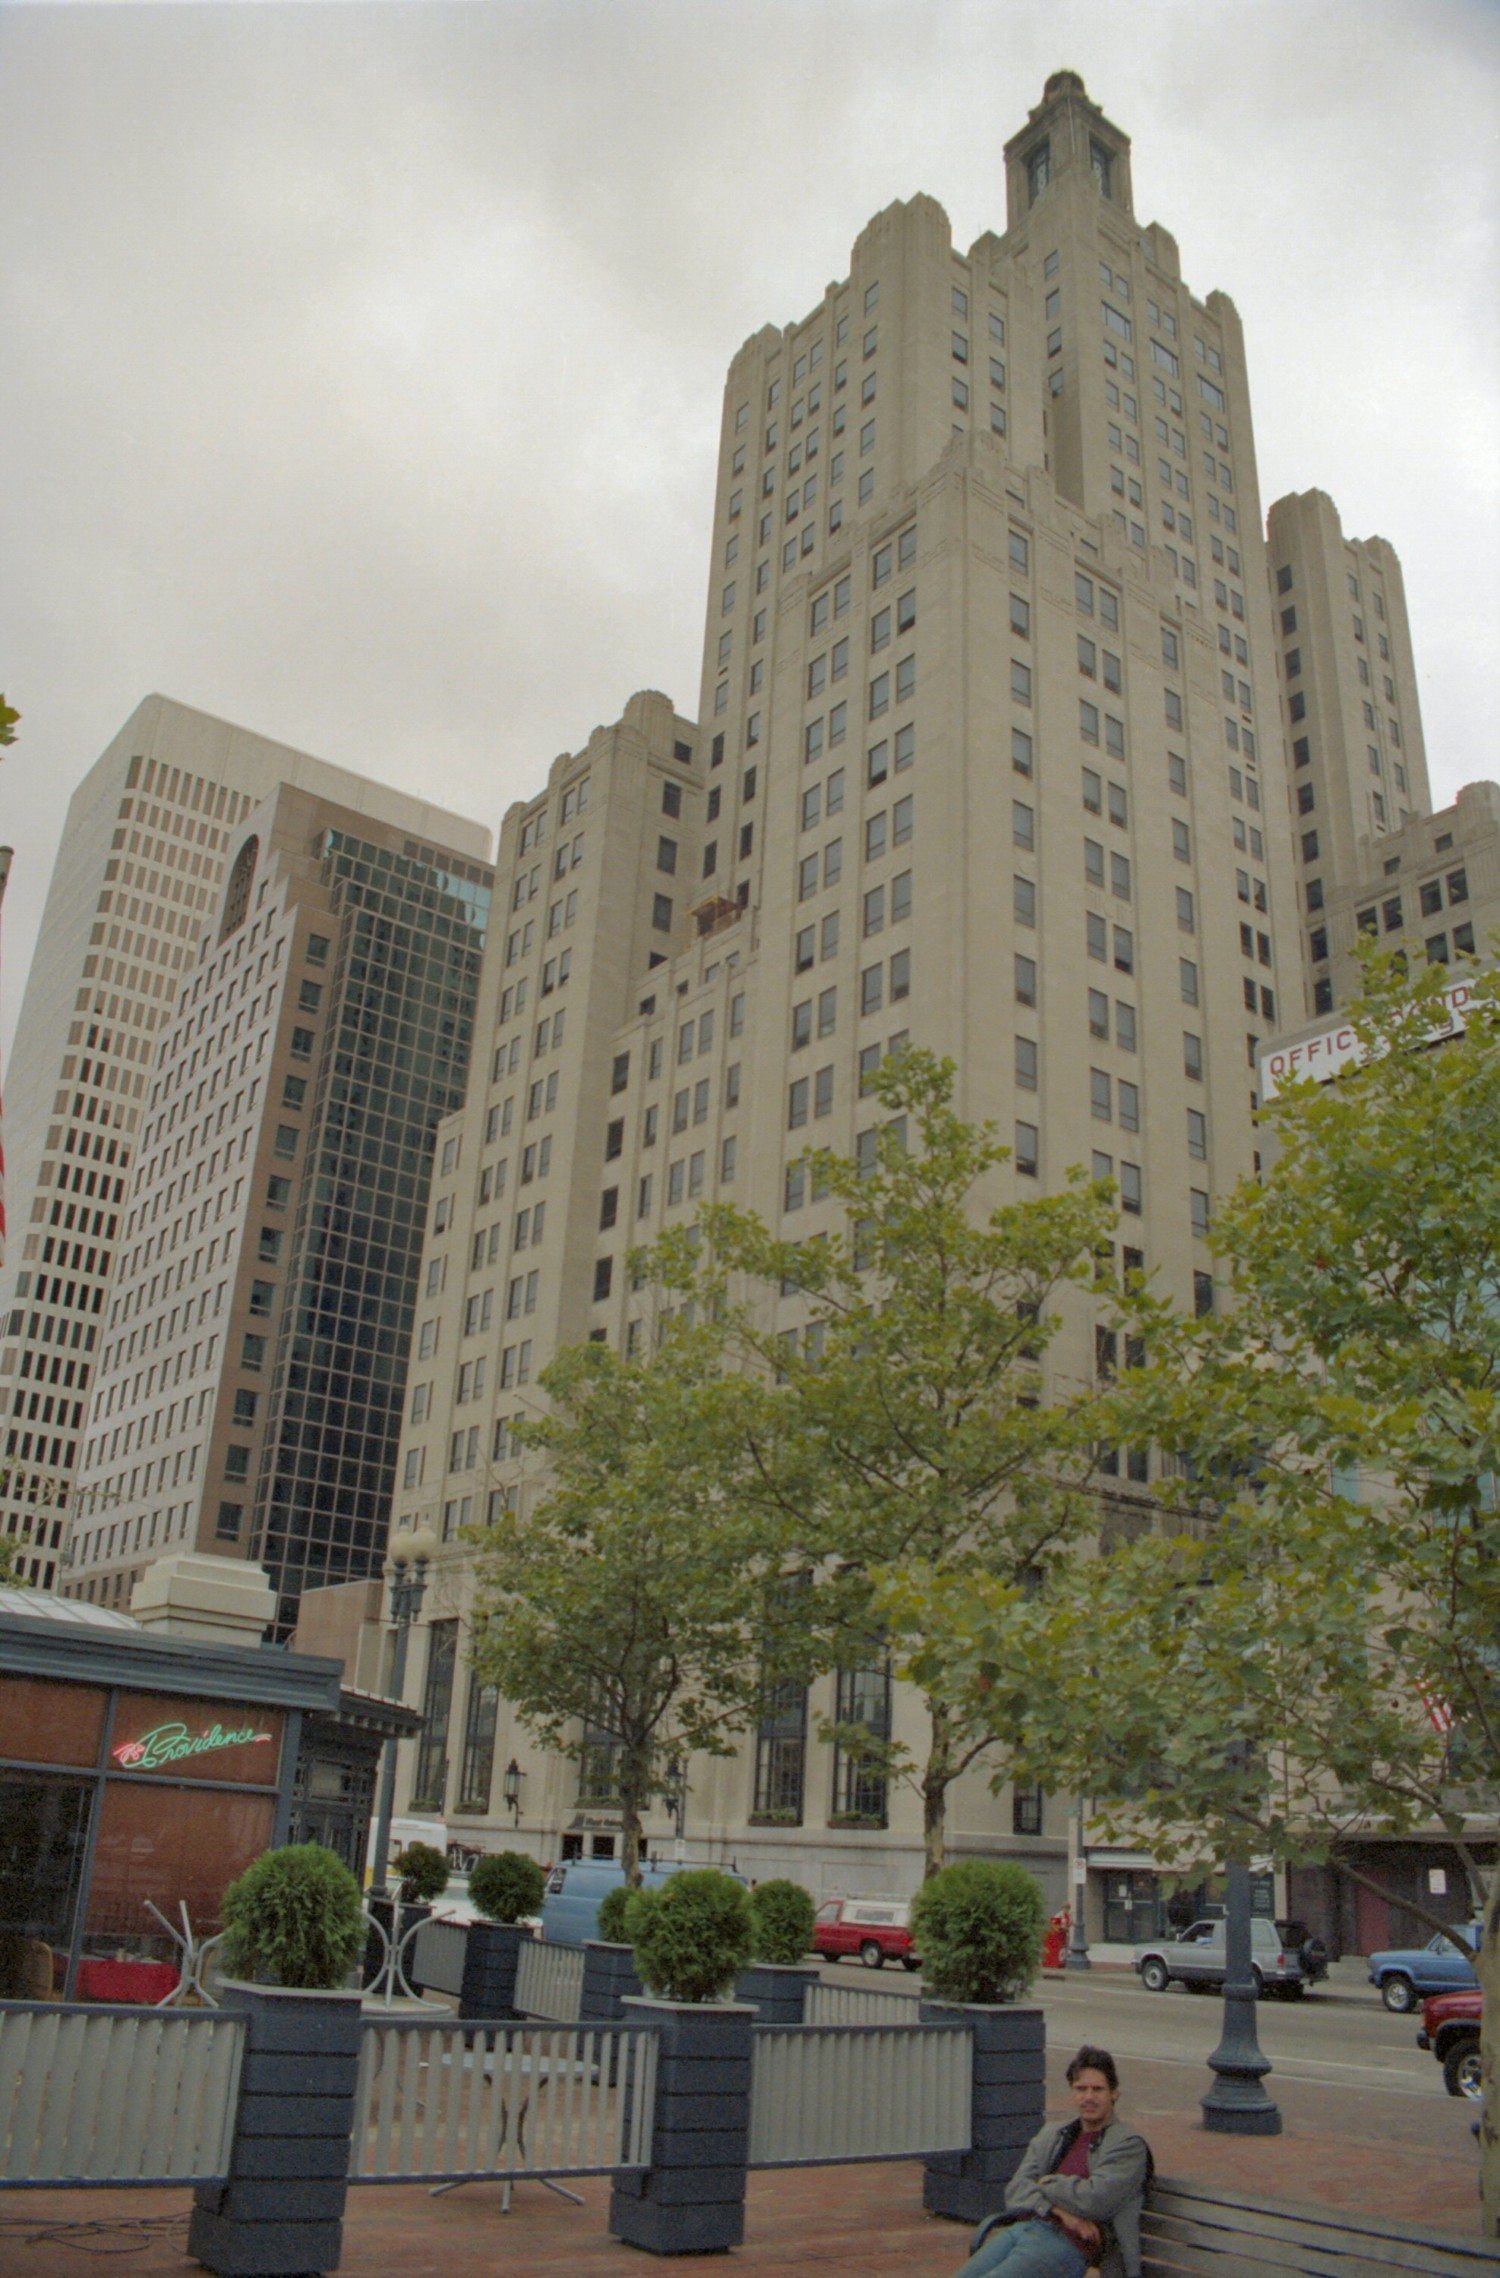 providence bank of america building photo